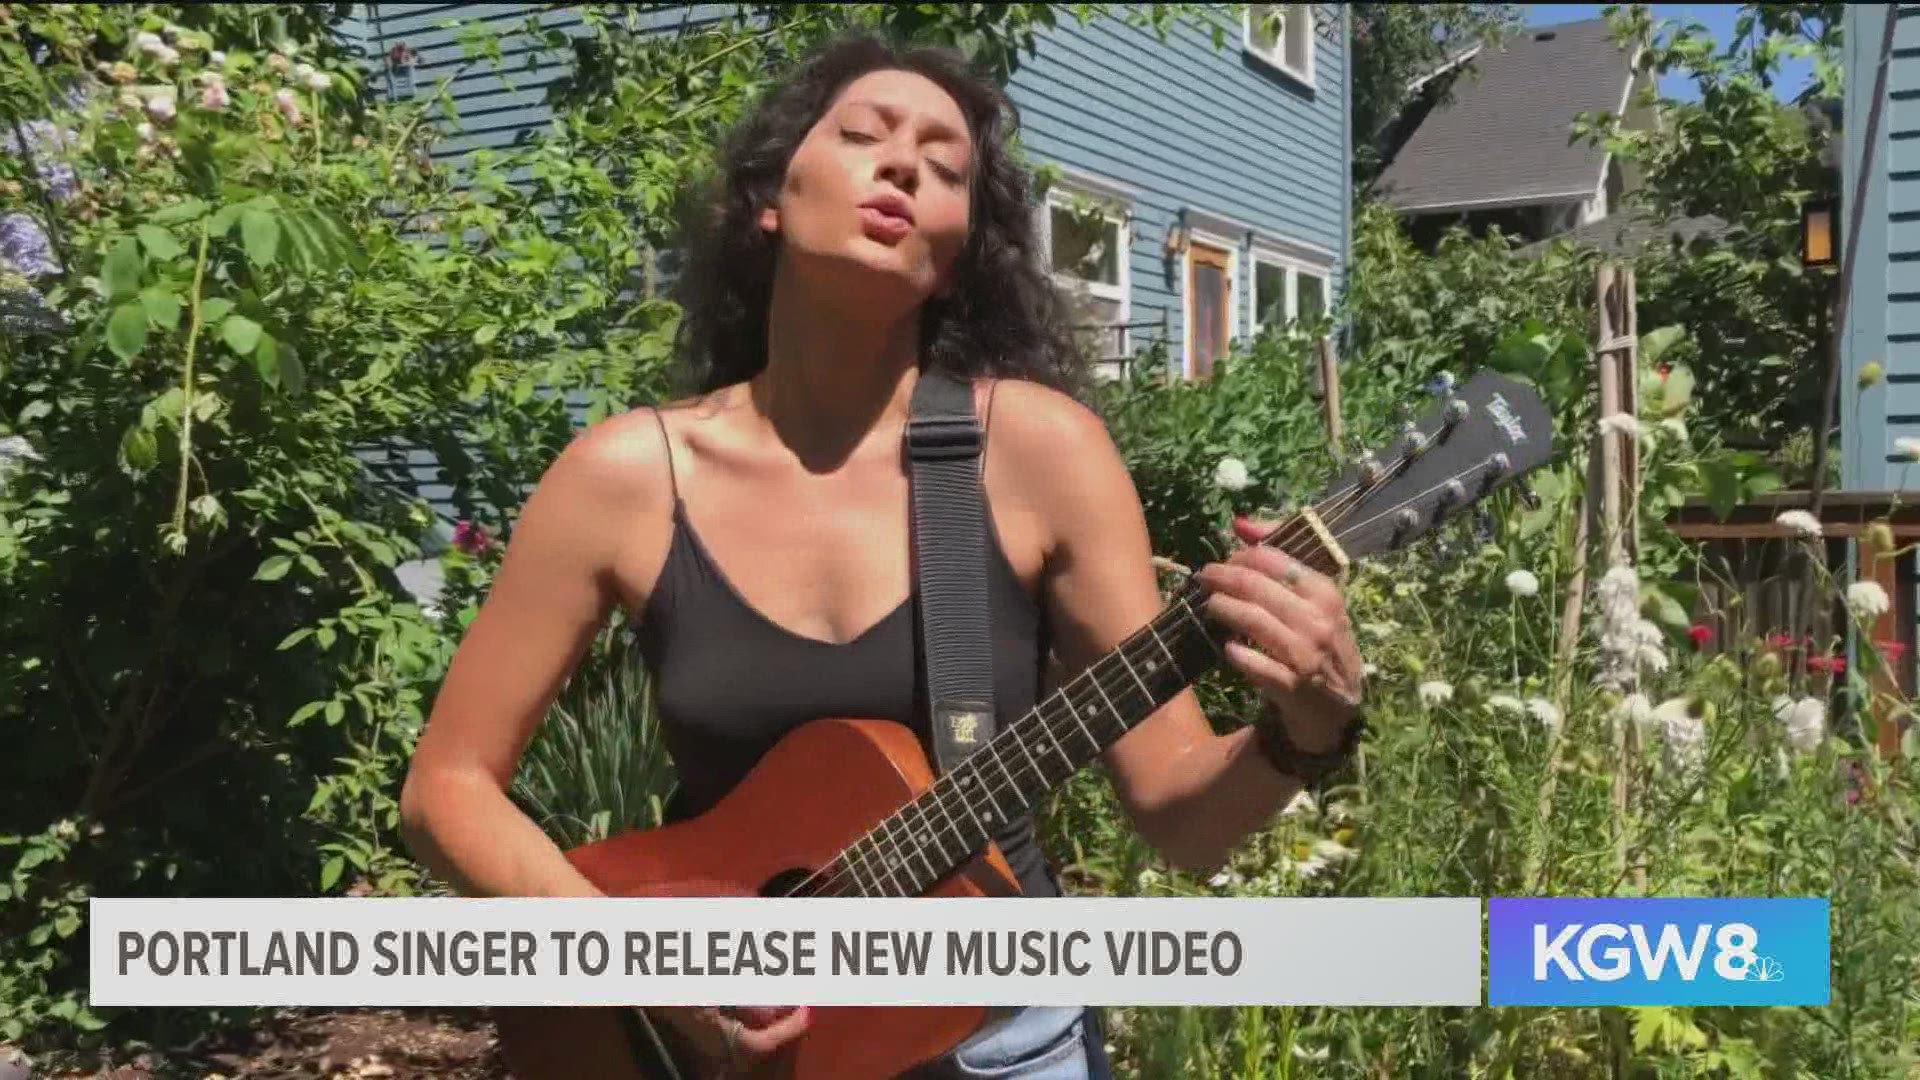 Portland singer and musician Lilla released a new music video for her song "Six Feet Apart."